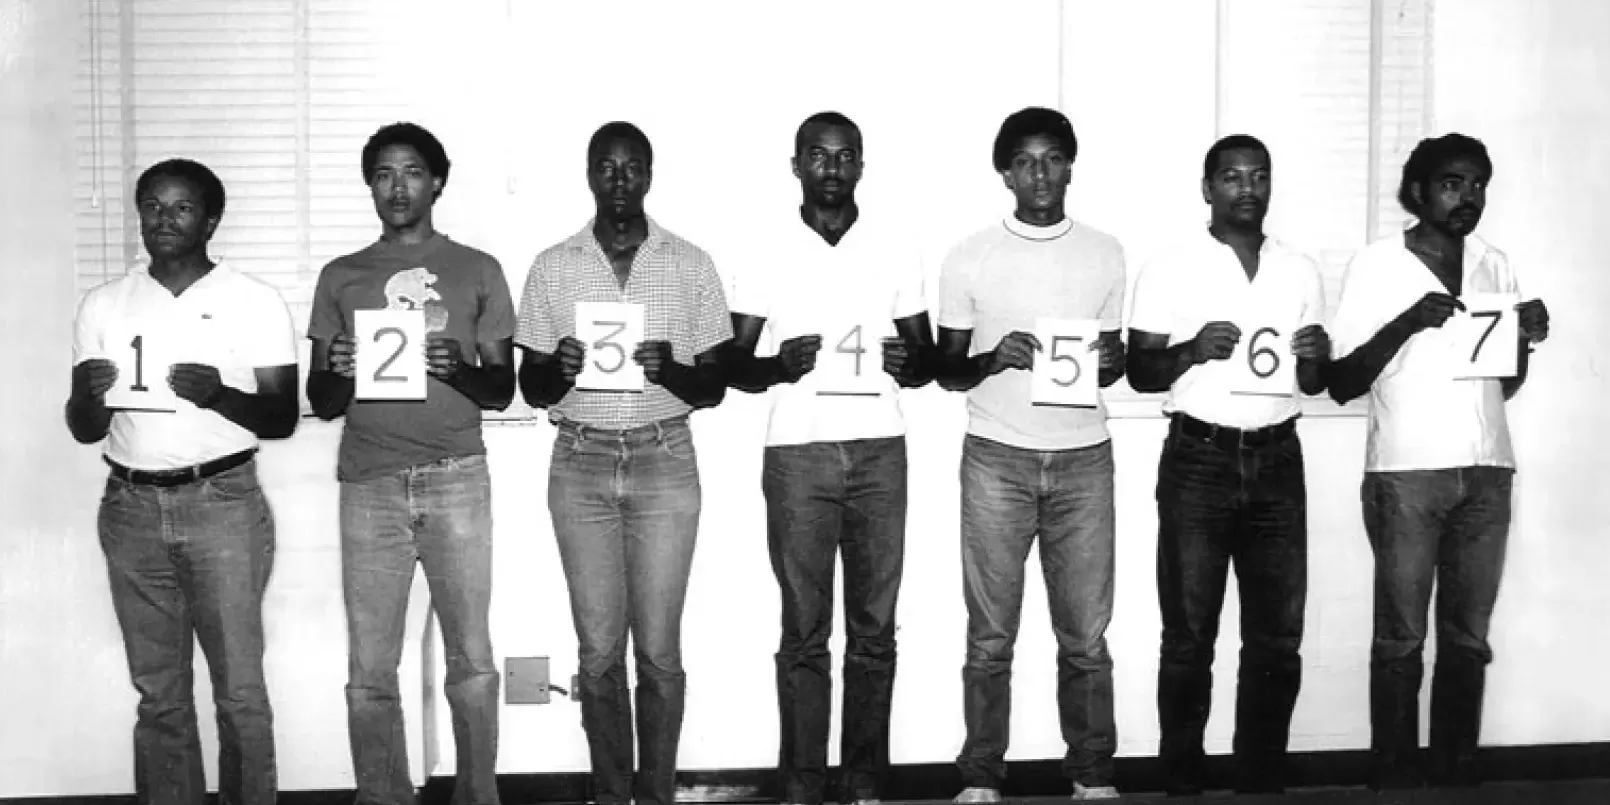 7 men standing side by side holding numbers 1-7